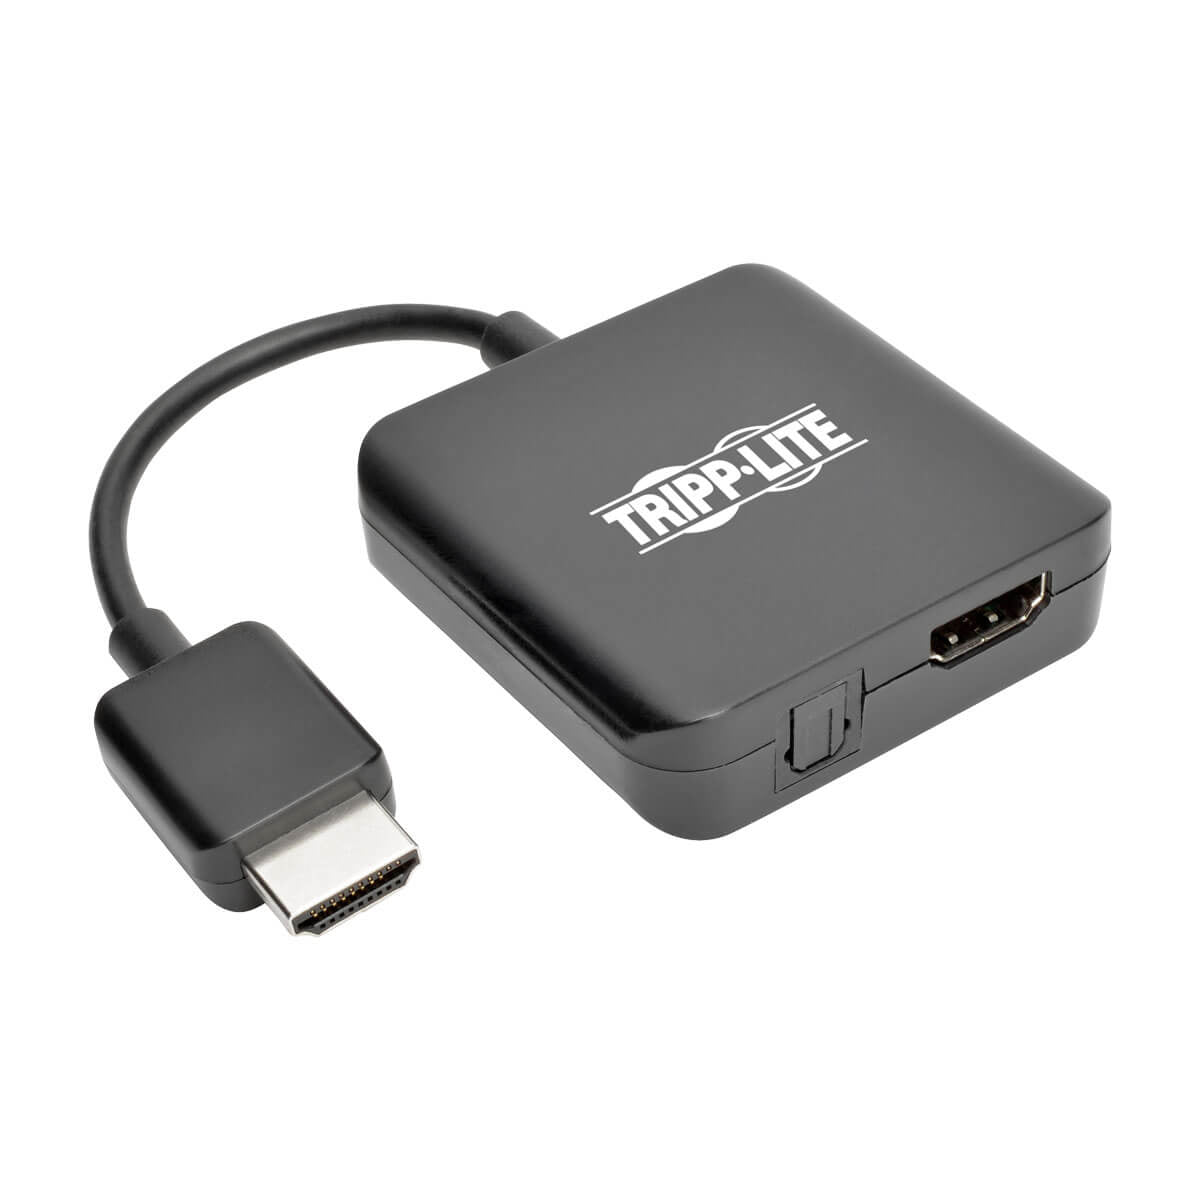 Tripp Lite P130-06N-Audio 4K Hdmi Audio De-Embedder/Extractor With Toslink And 3.5 Mm Stereo Output, 5.1 Channel, Hdcp, 4K 30Hz, 6-In. (15.24 Cm)